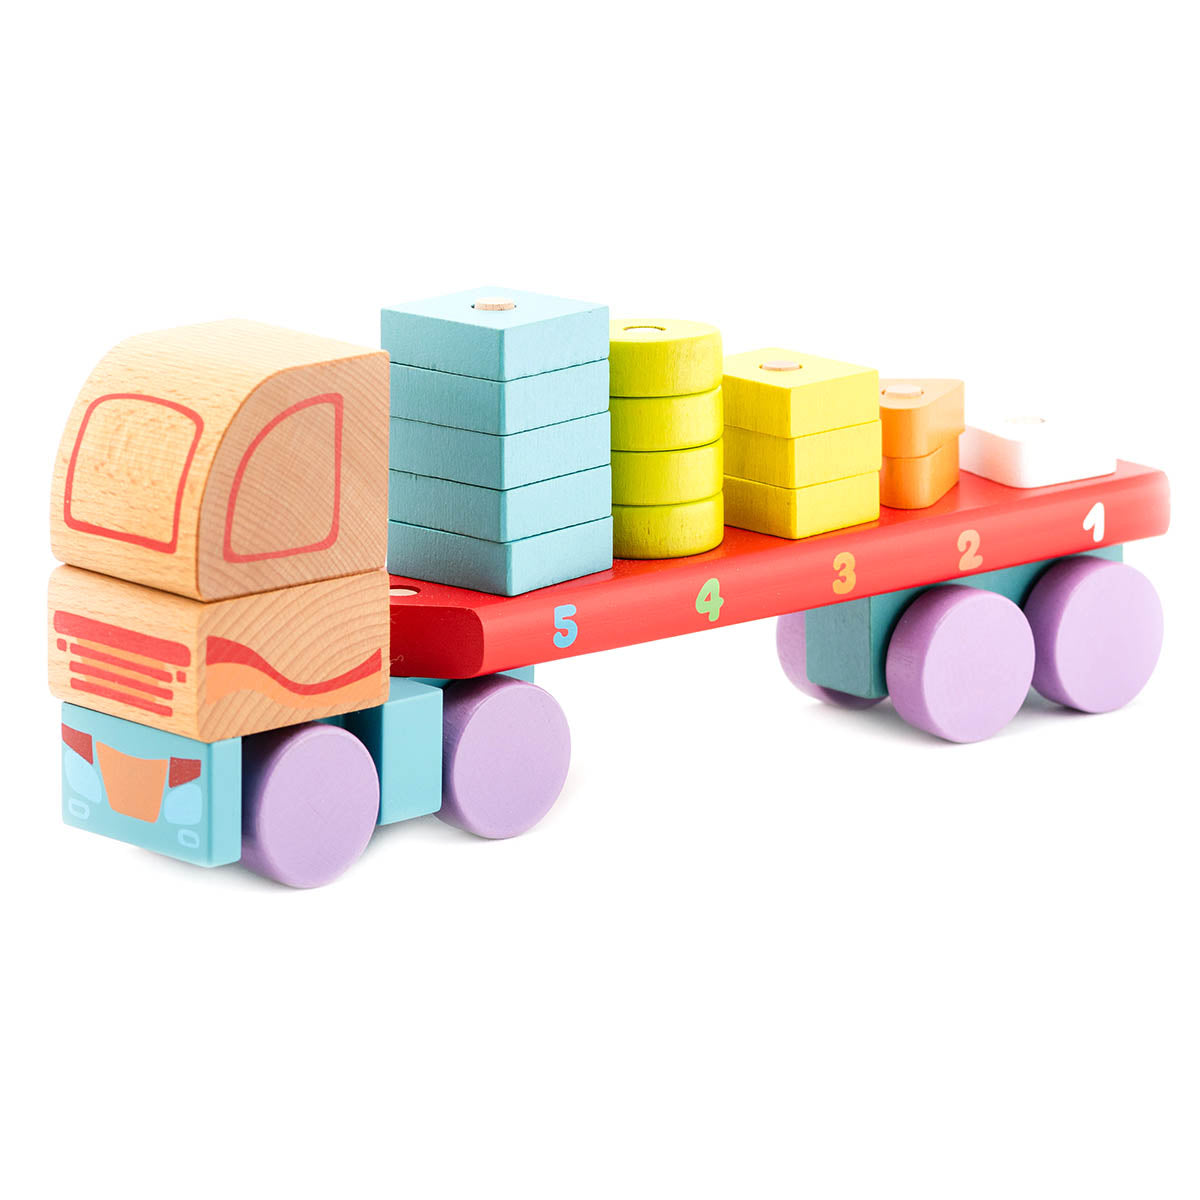 Truck with geometric figures LM-13